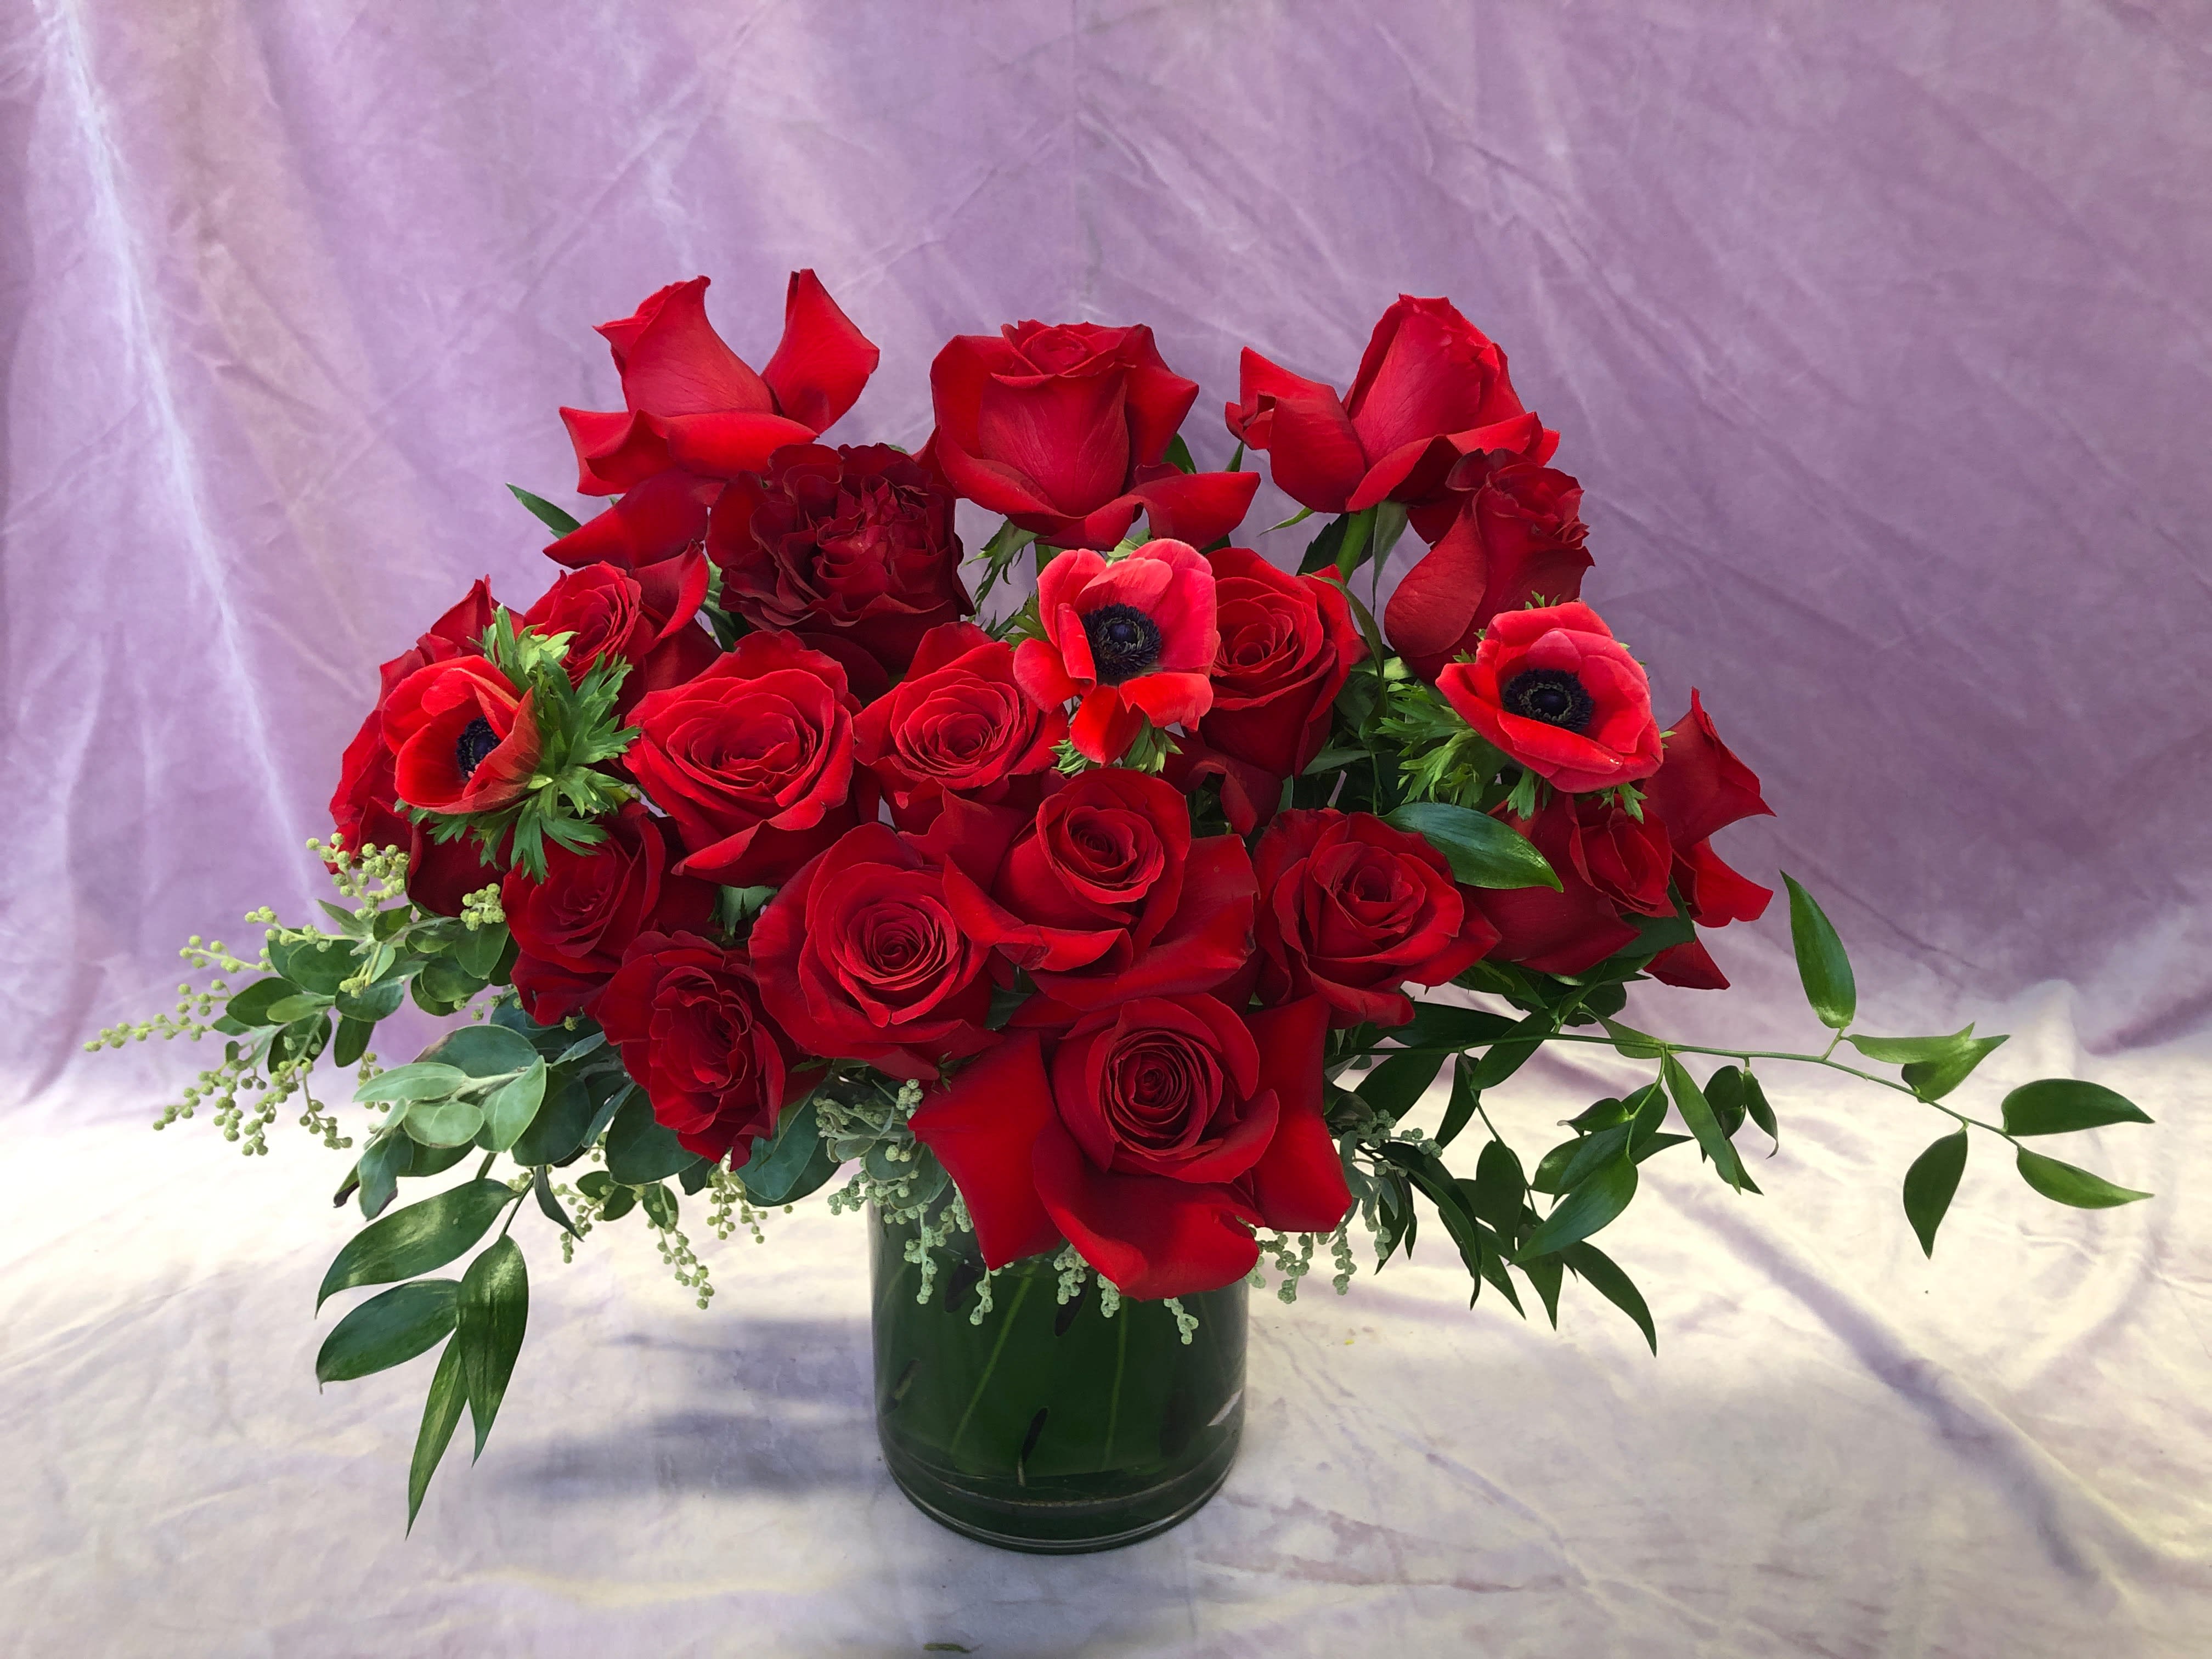 Heartthrob - This garden style, red floral arrangement is sure to pull at any heart string. This arrangement may include red roses, red garden roses, red anemones, and other beautifully toned elements. Over 20 roses and accent flowers make up this gorgeous handmade arrangement. 